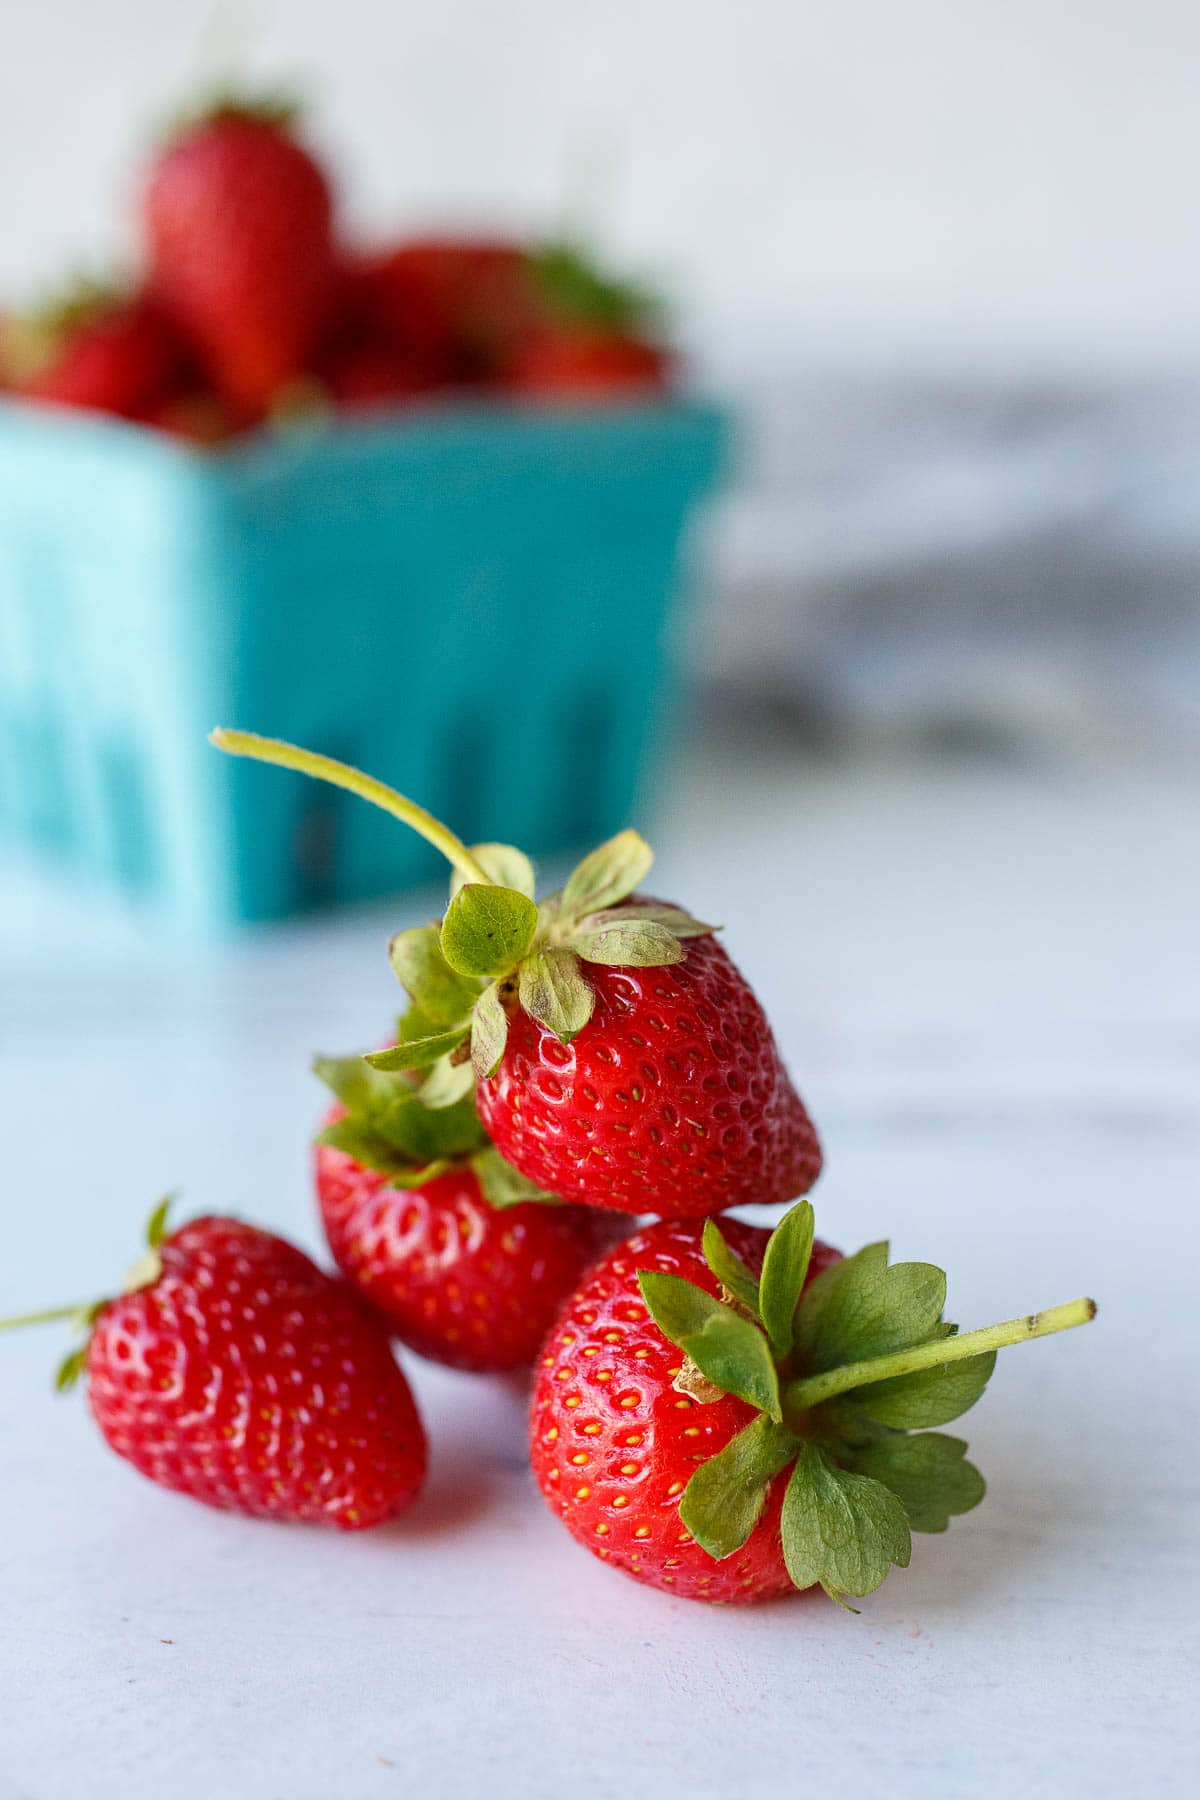 Fresh strawberries with stems.